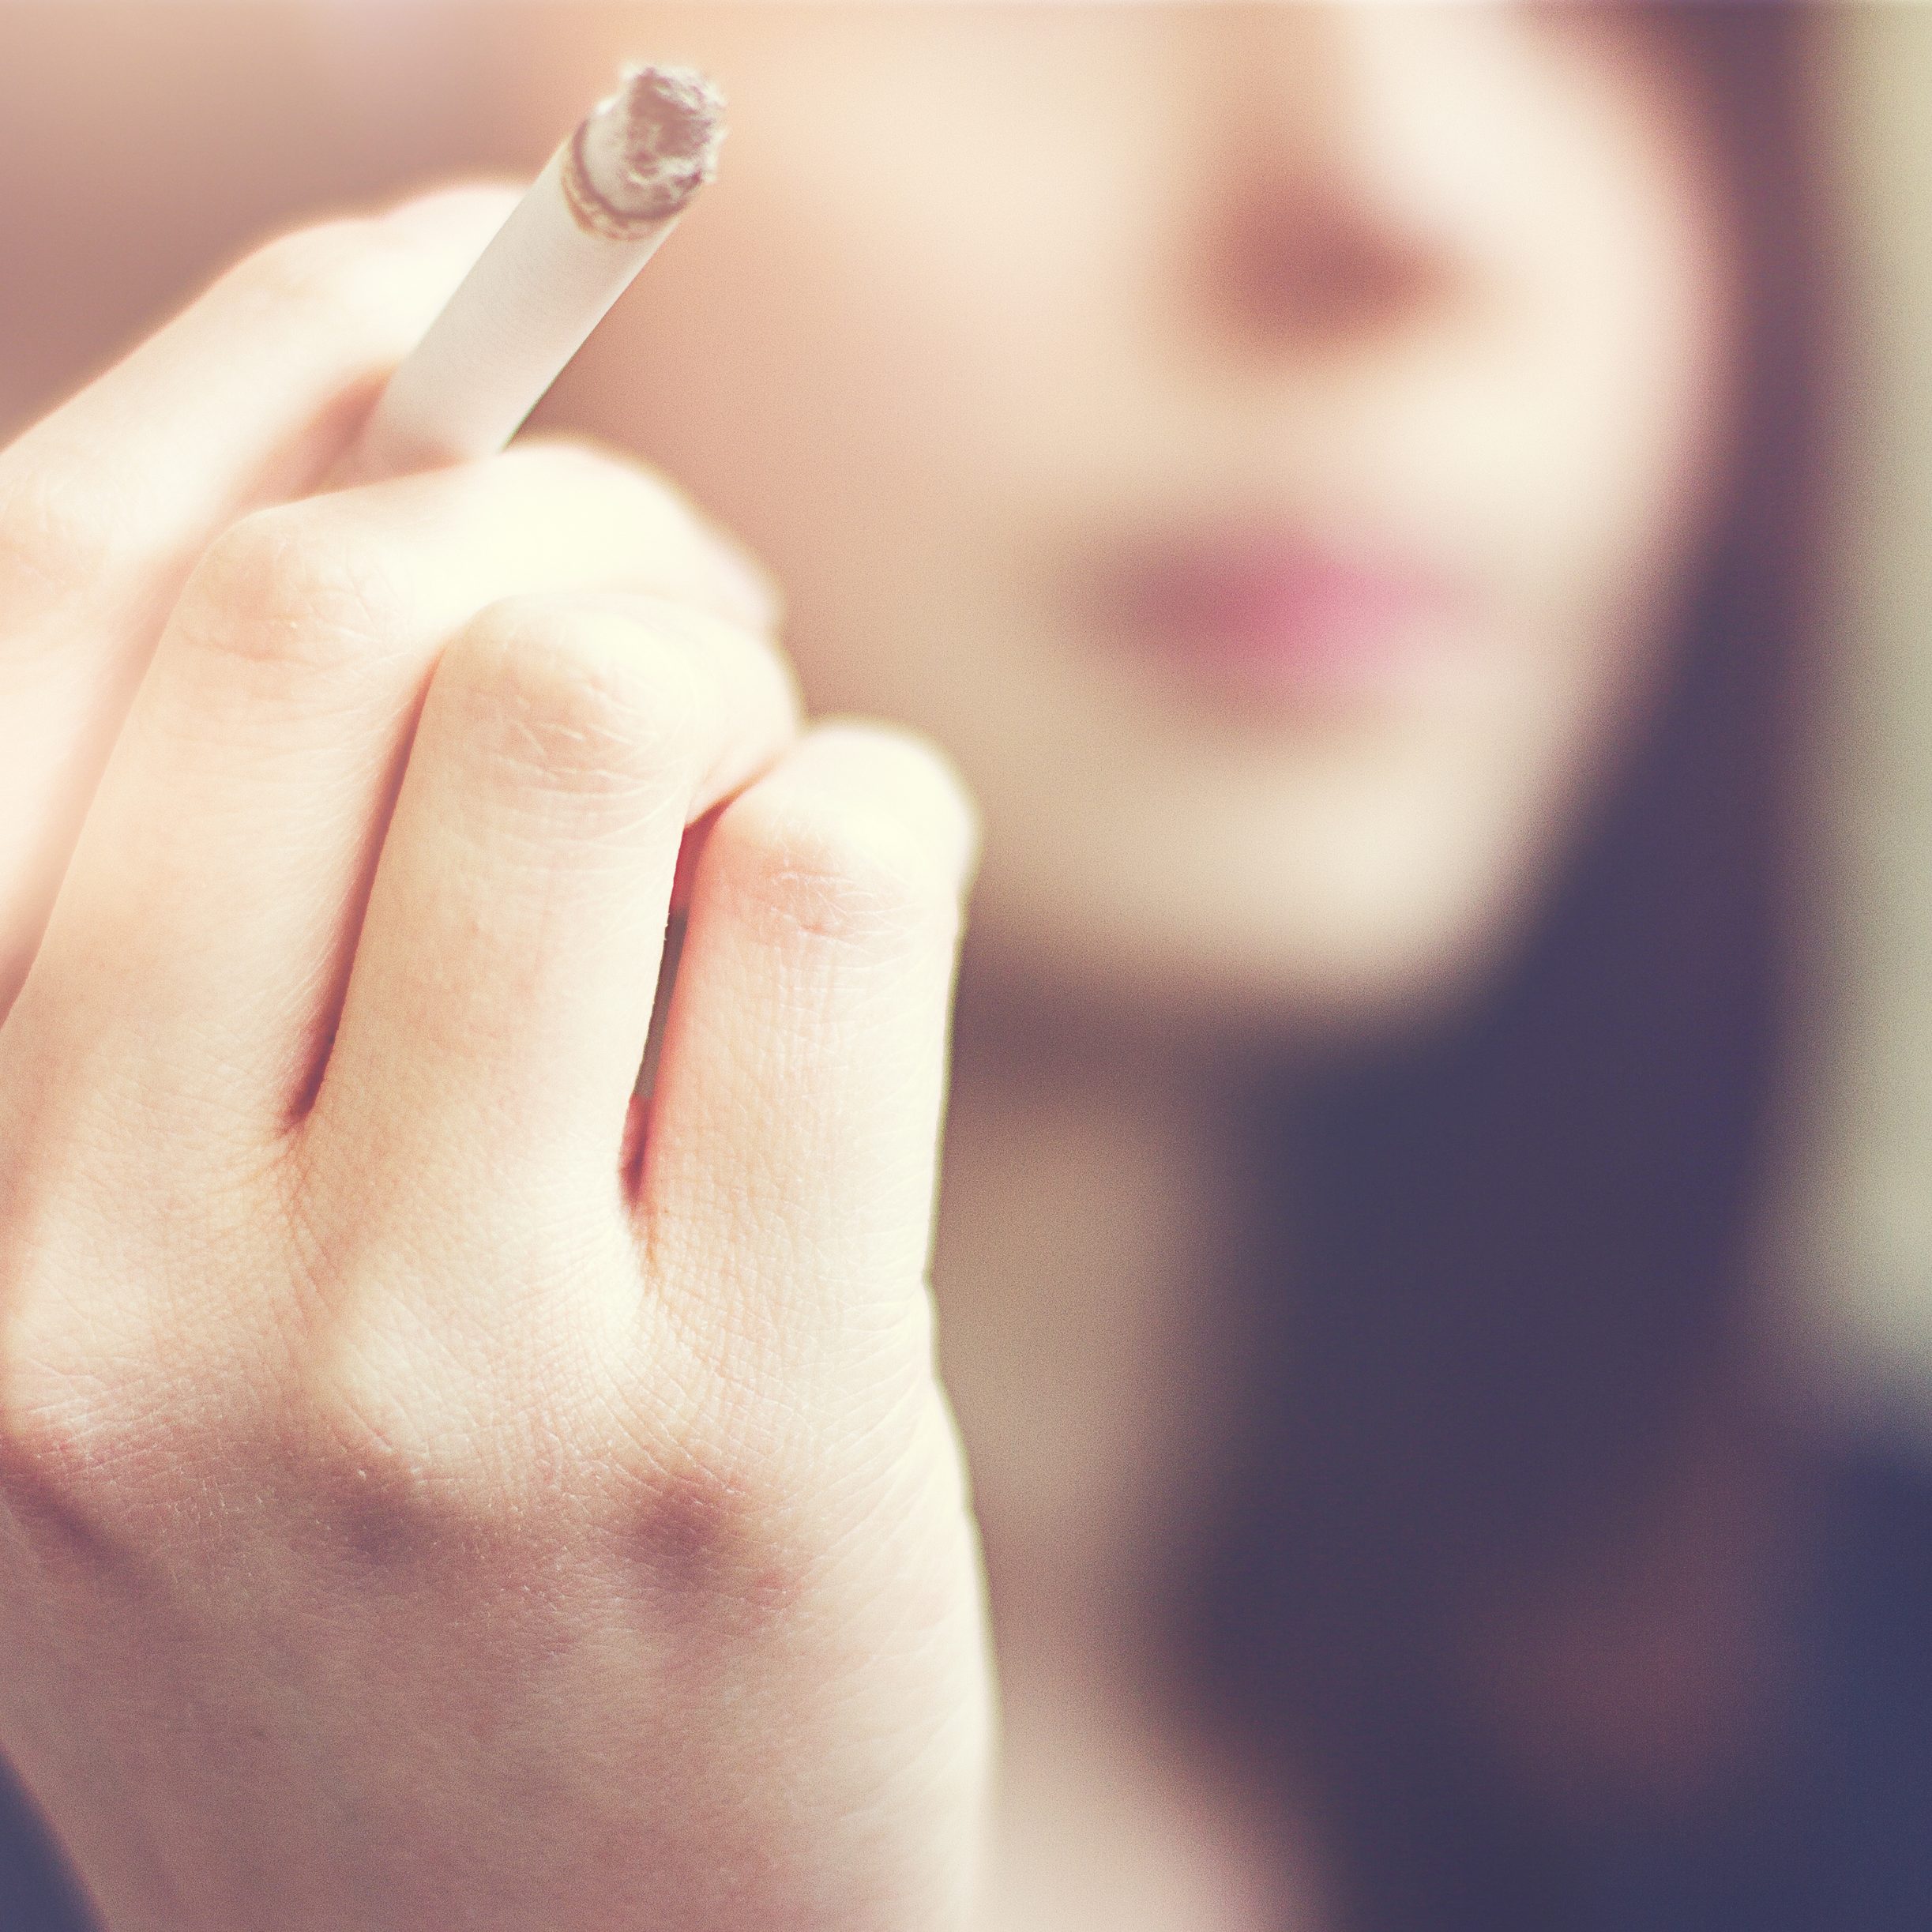 How smoking affects your eyes